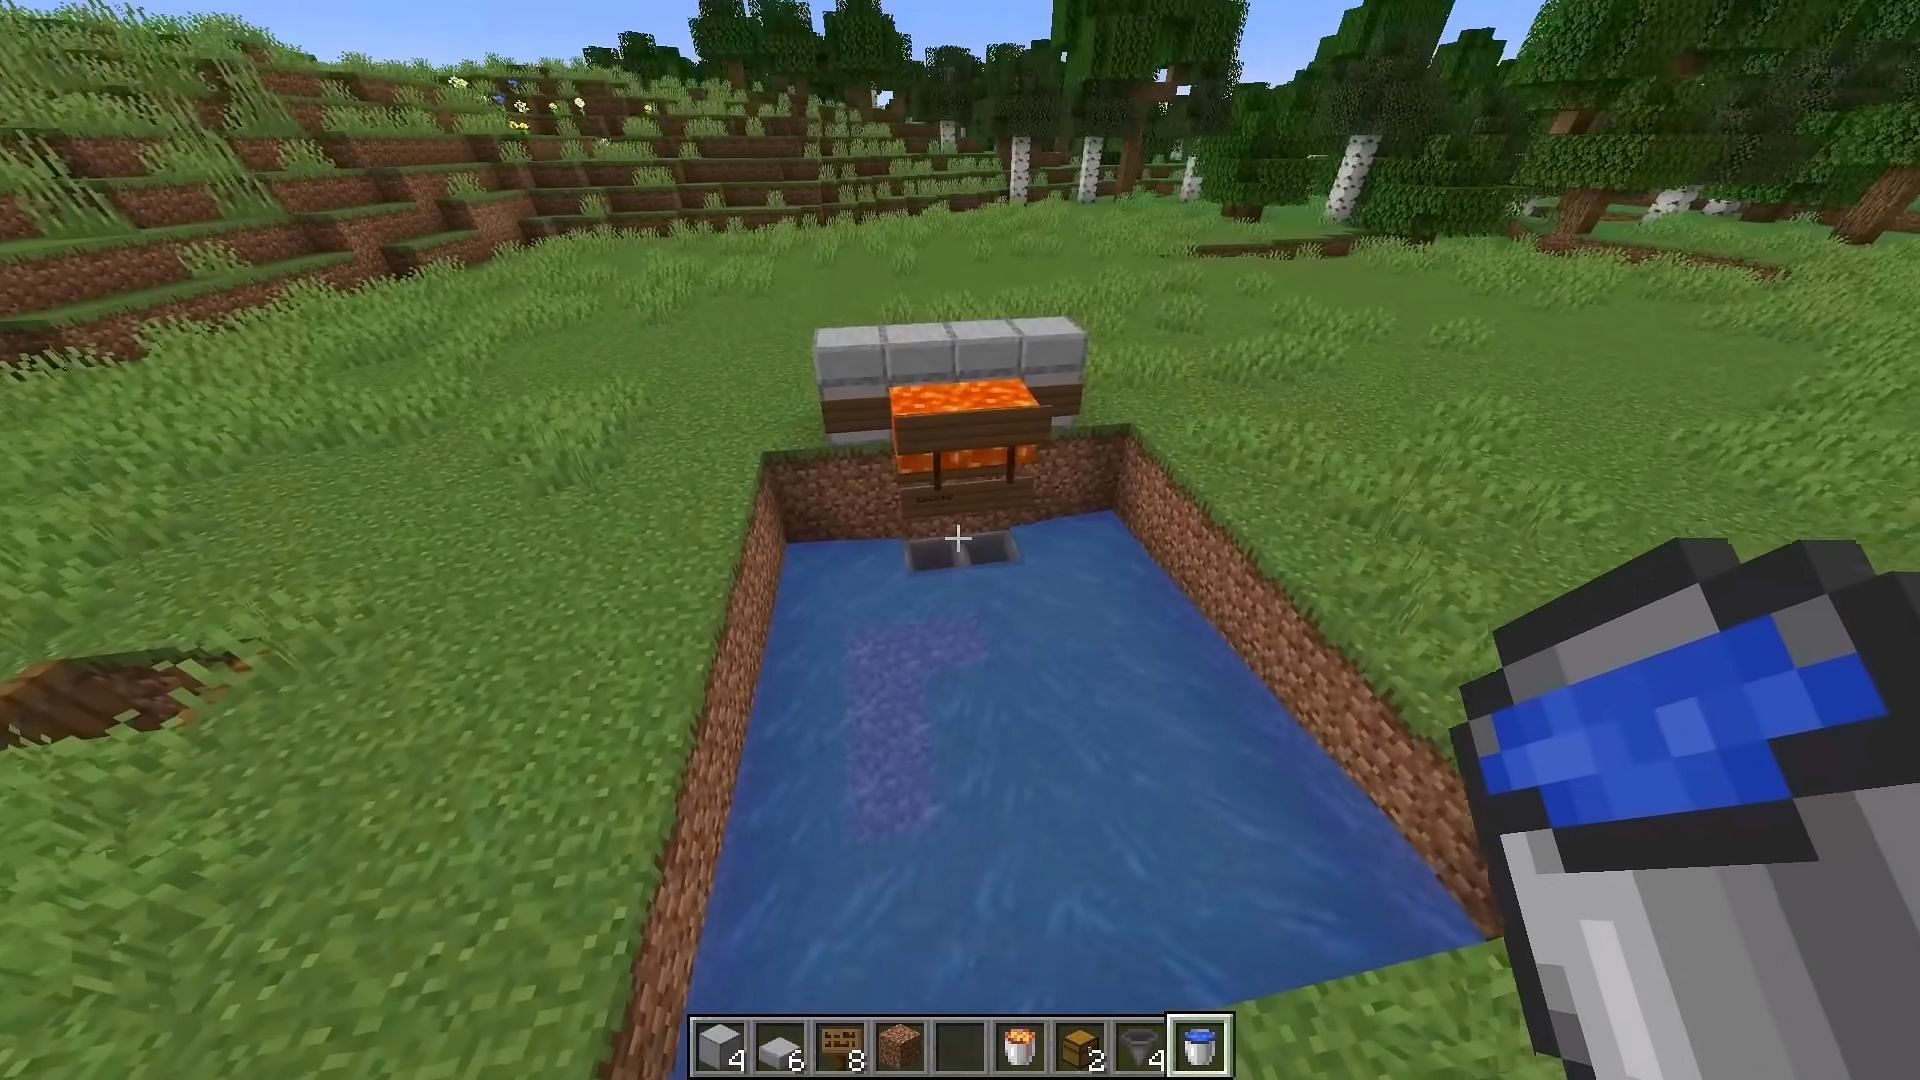 Underground iron farm has villagers and zombies completely hidden in Minecraft 1.20 (Image via YouTube/Voltrox)